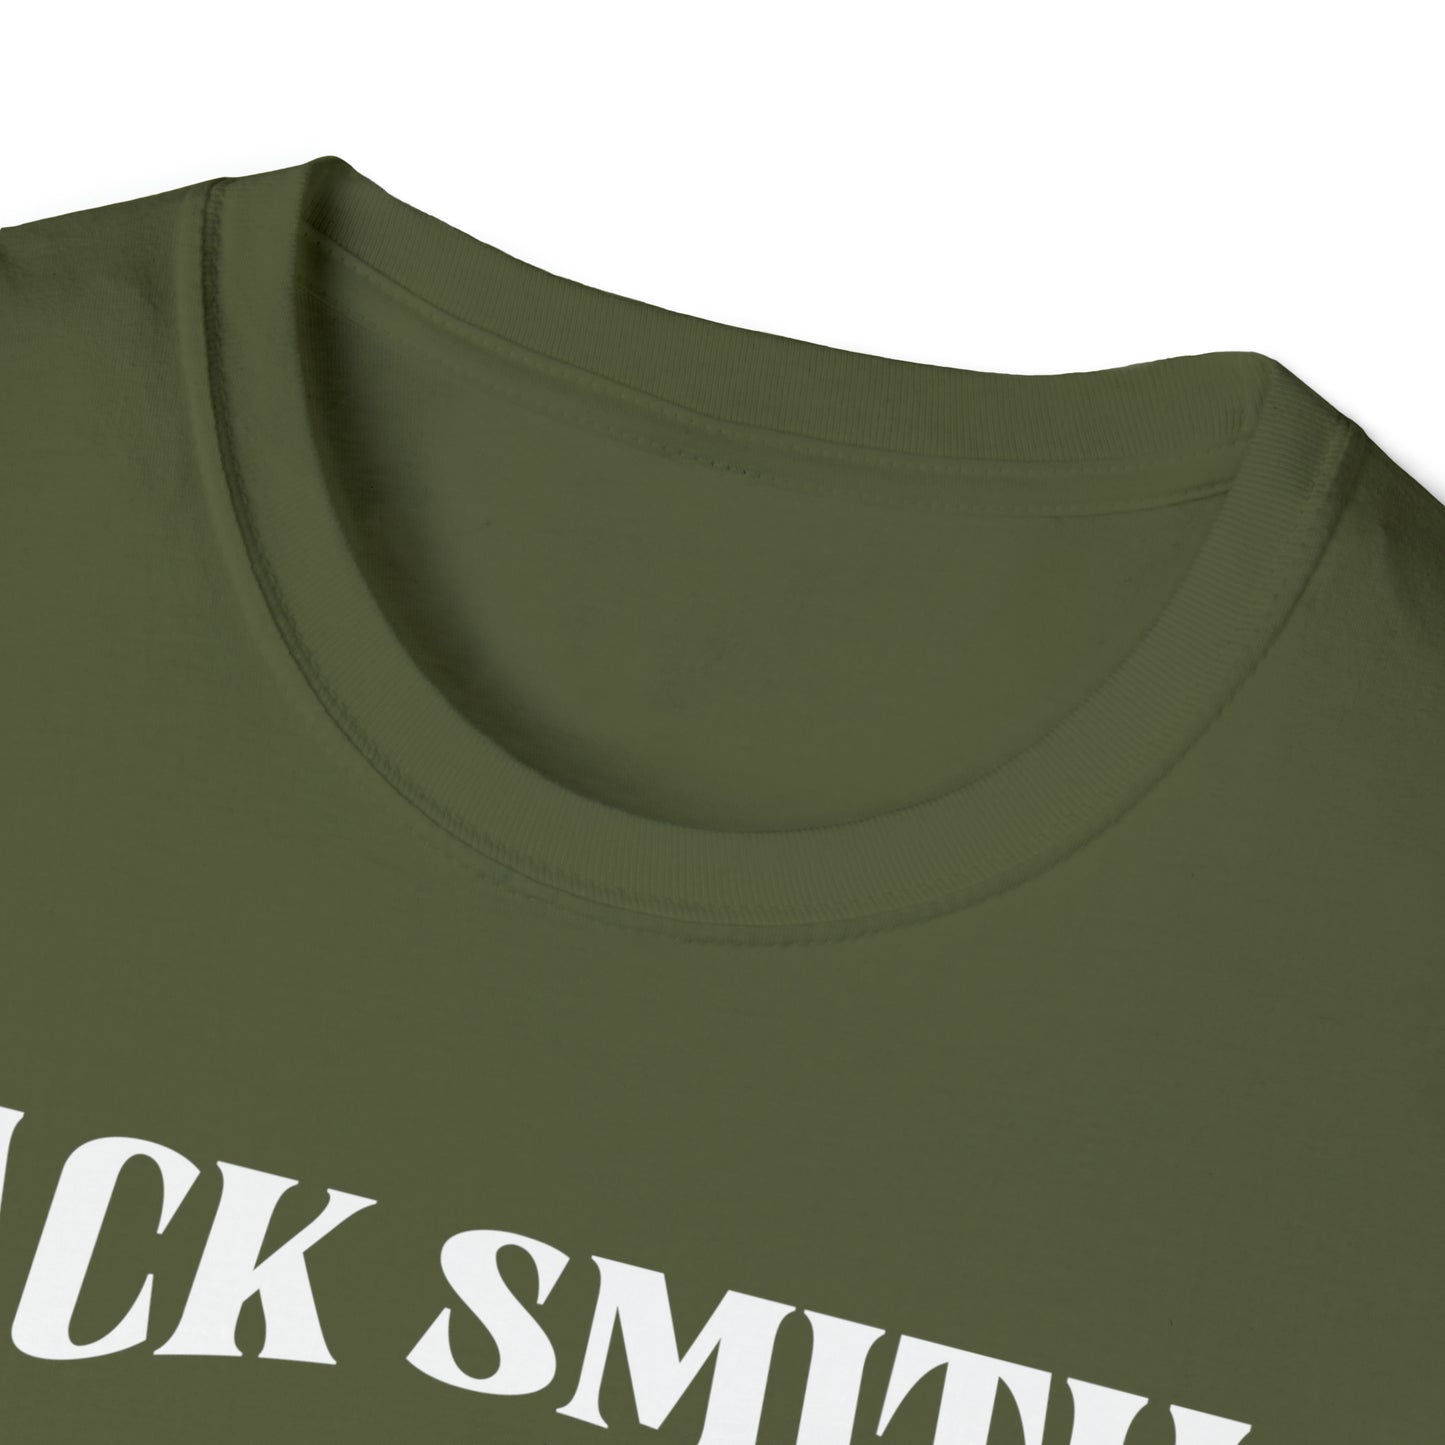 The ORIGINAL Jack Smith Fan Club - Unisex Softstyle T-Shirt, Gift for Friend